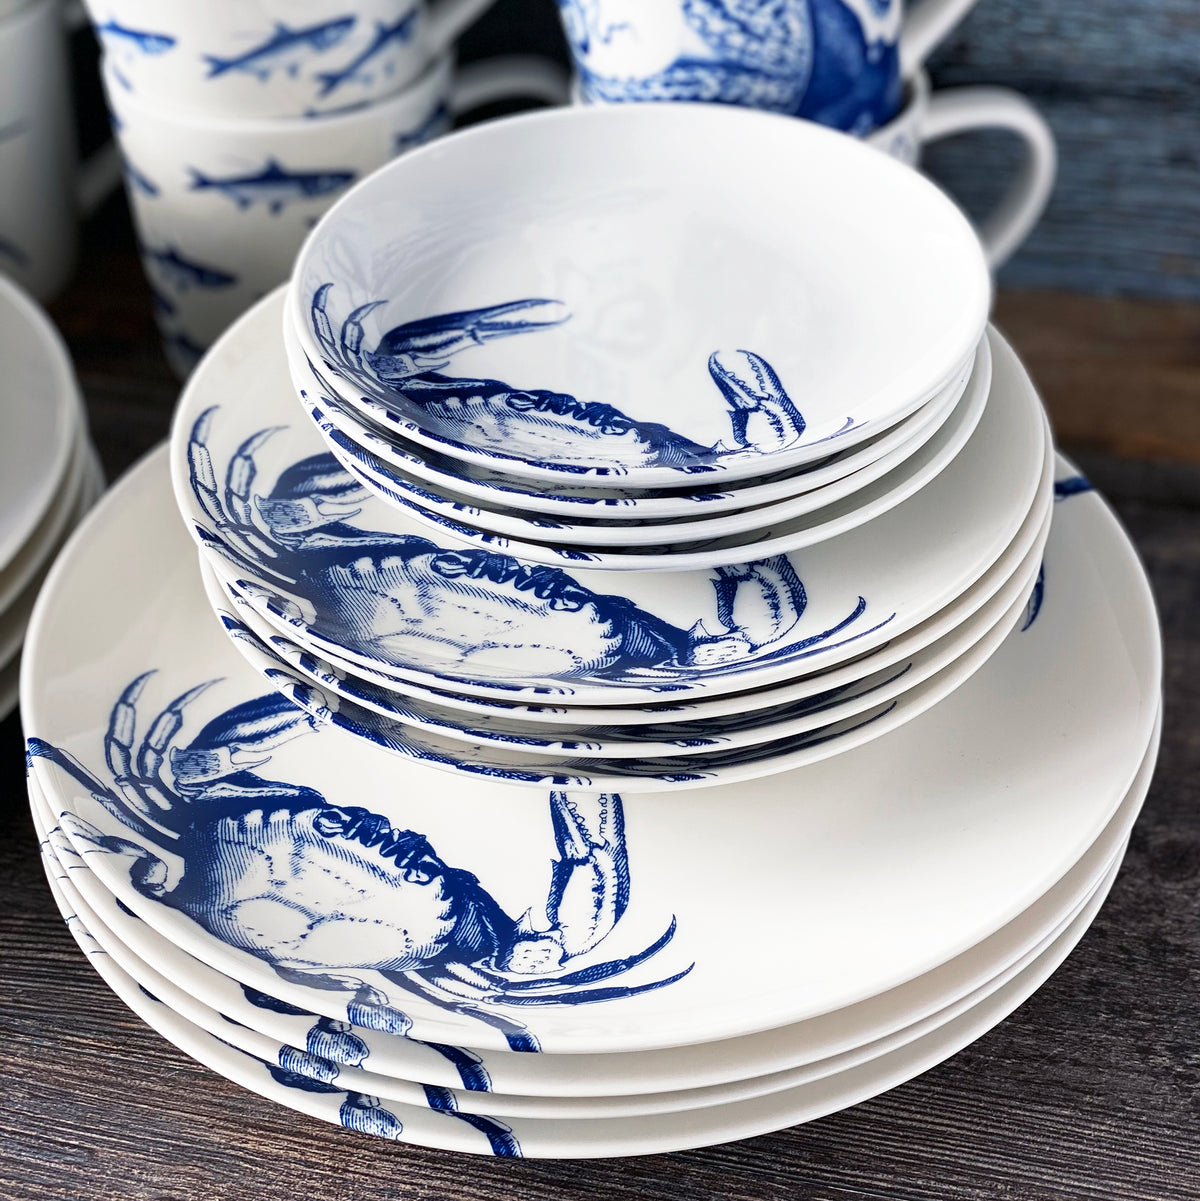 A stack of Crab Blue Canapé Plates from Caskata Artisanal Home, made from high-fired porcelain.